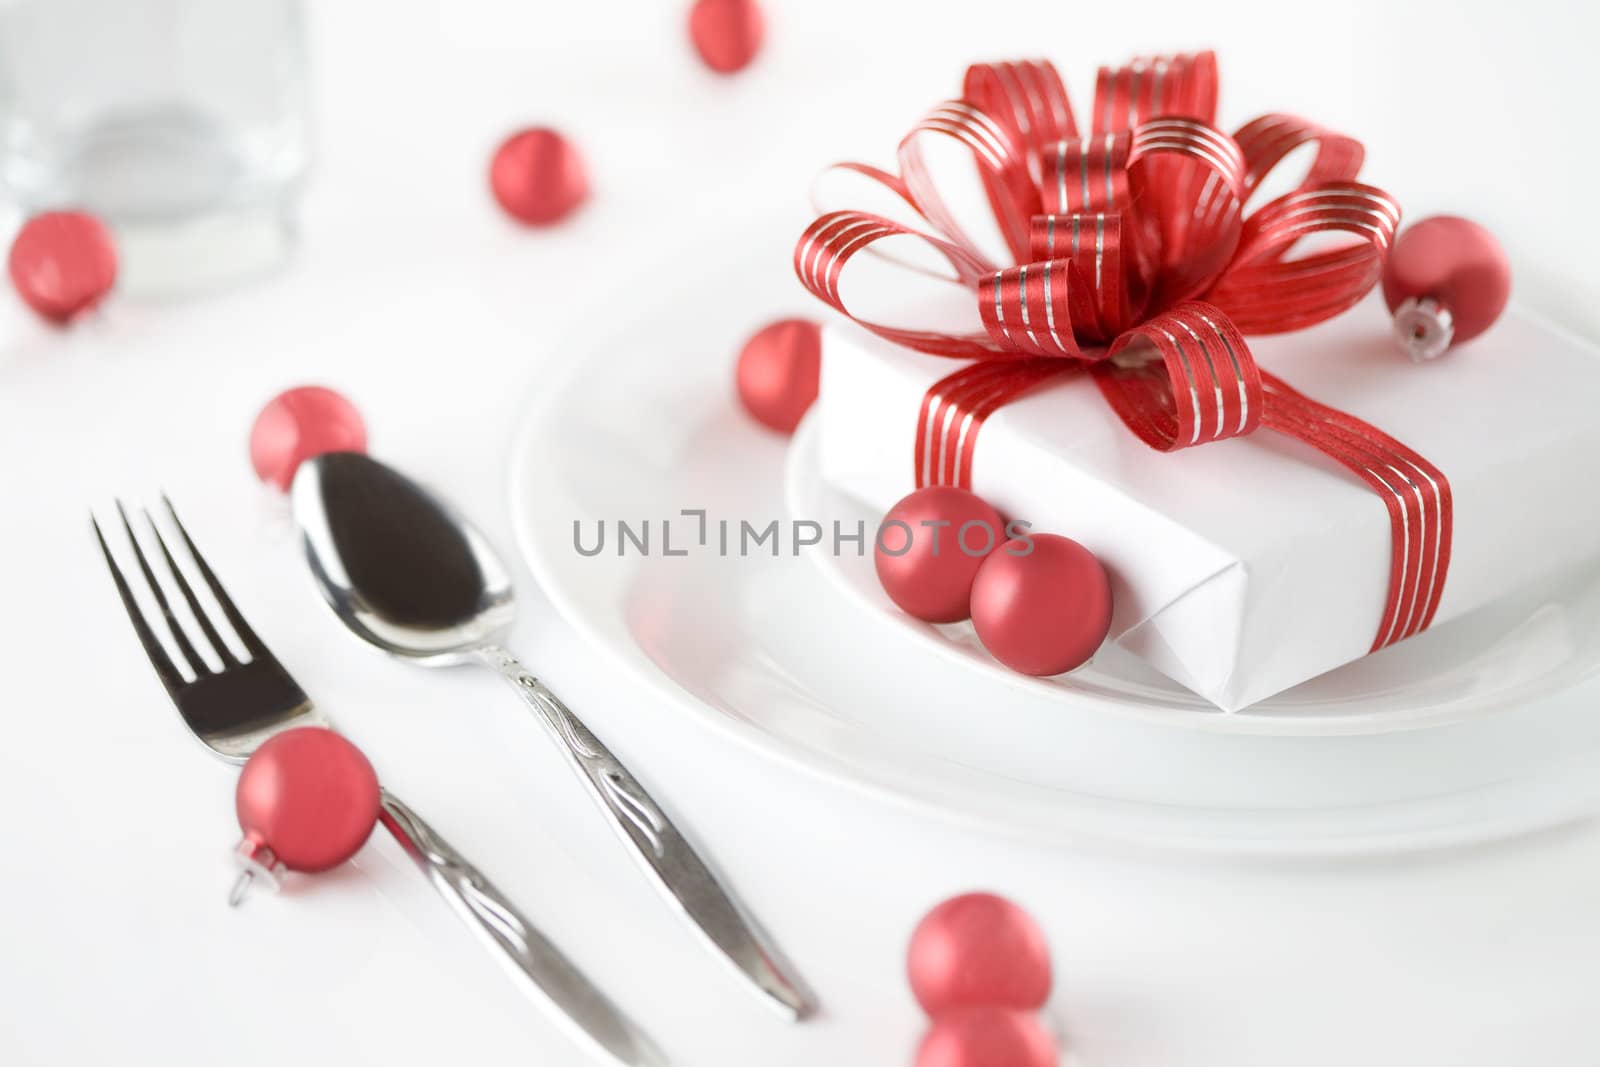 White present with red ribbons on a dinner plate and ornaments, christmas theme